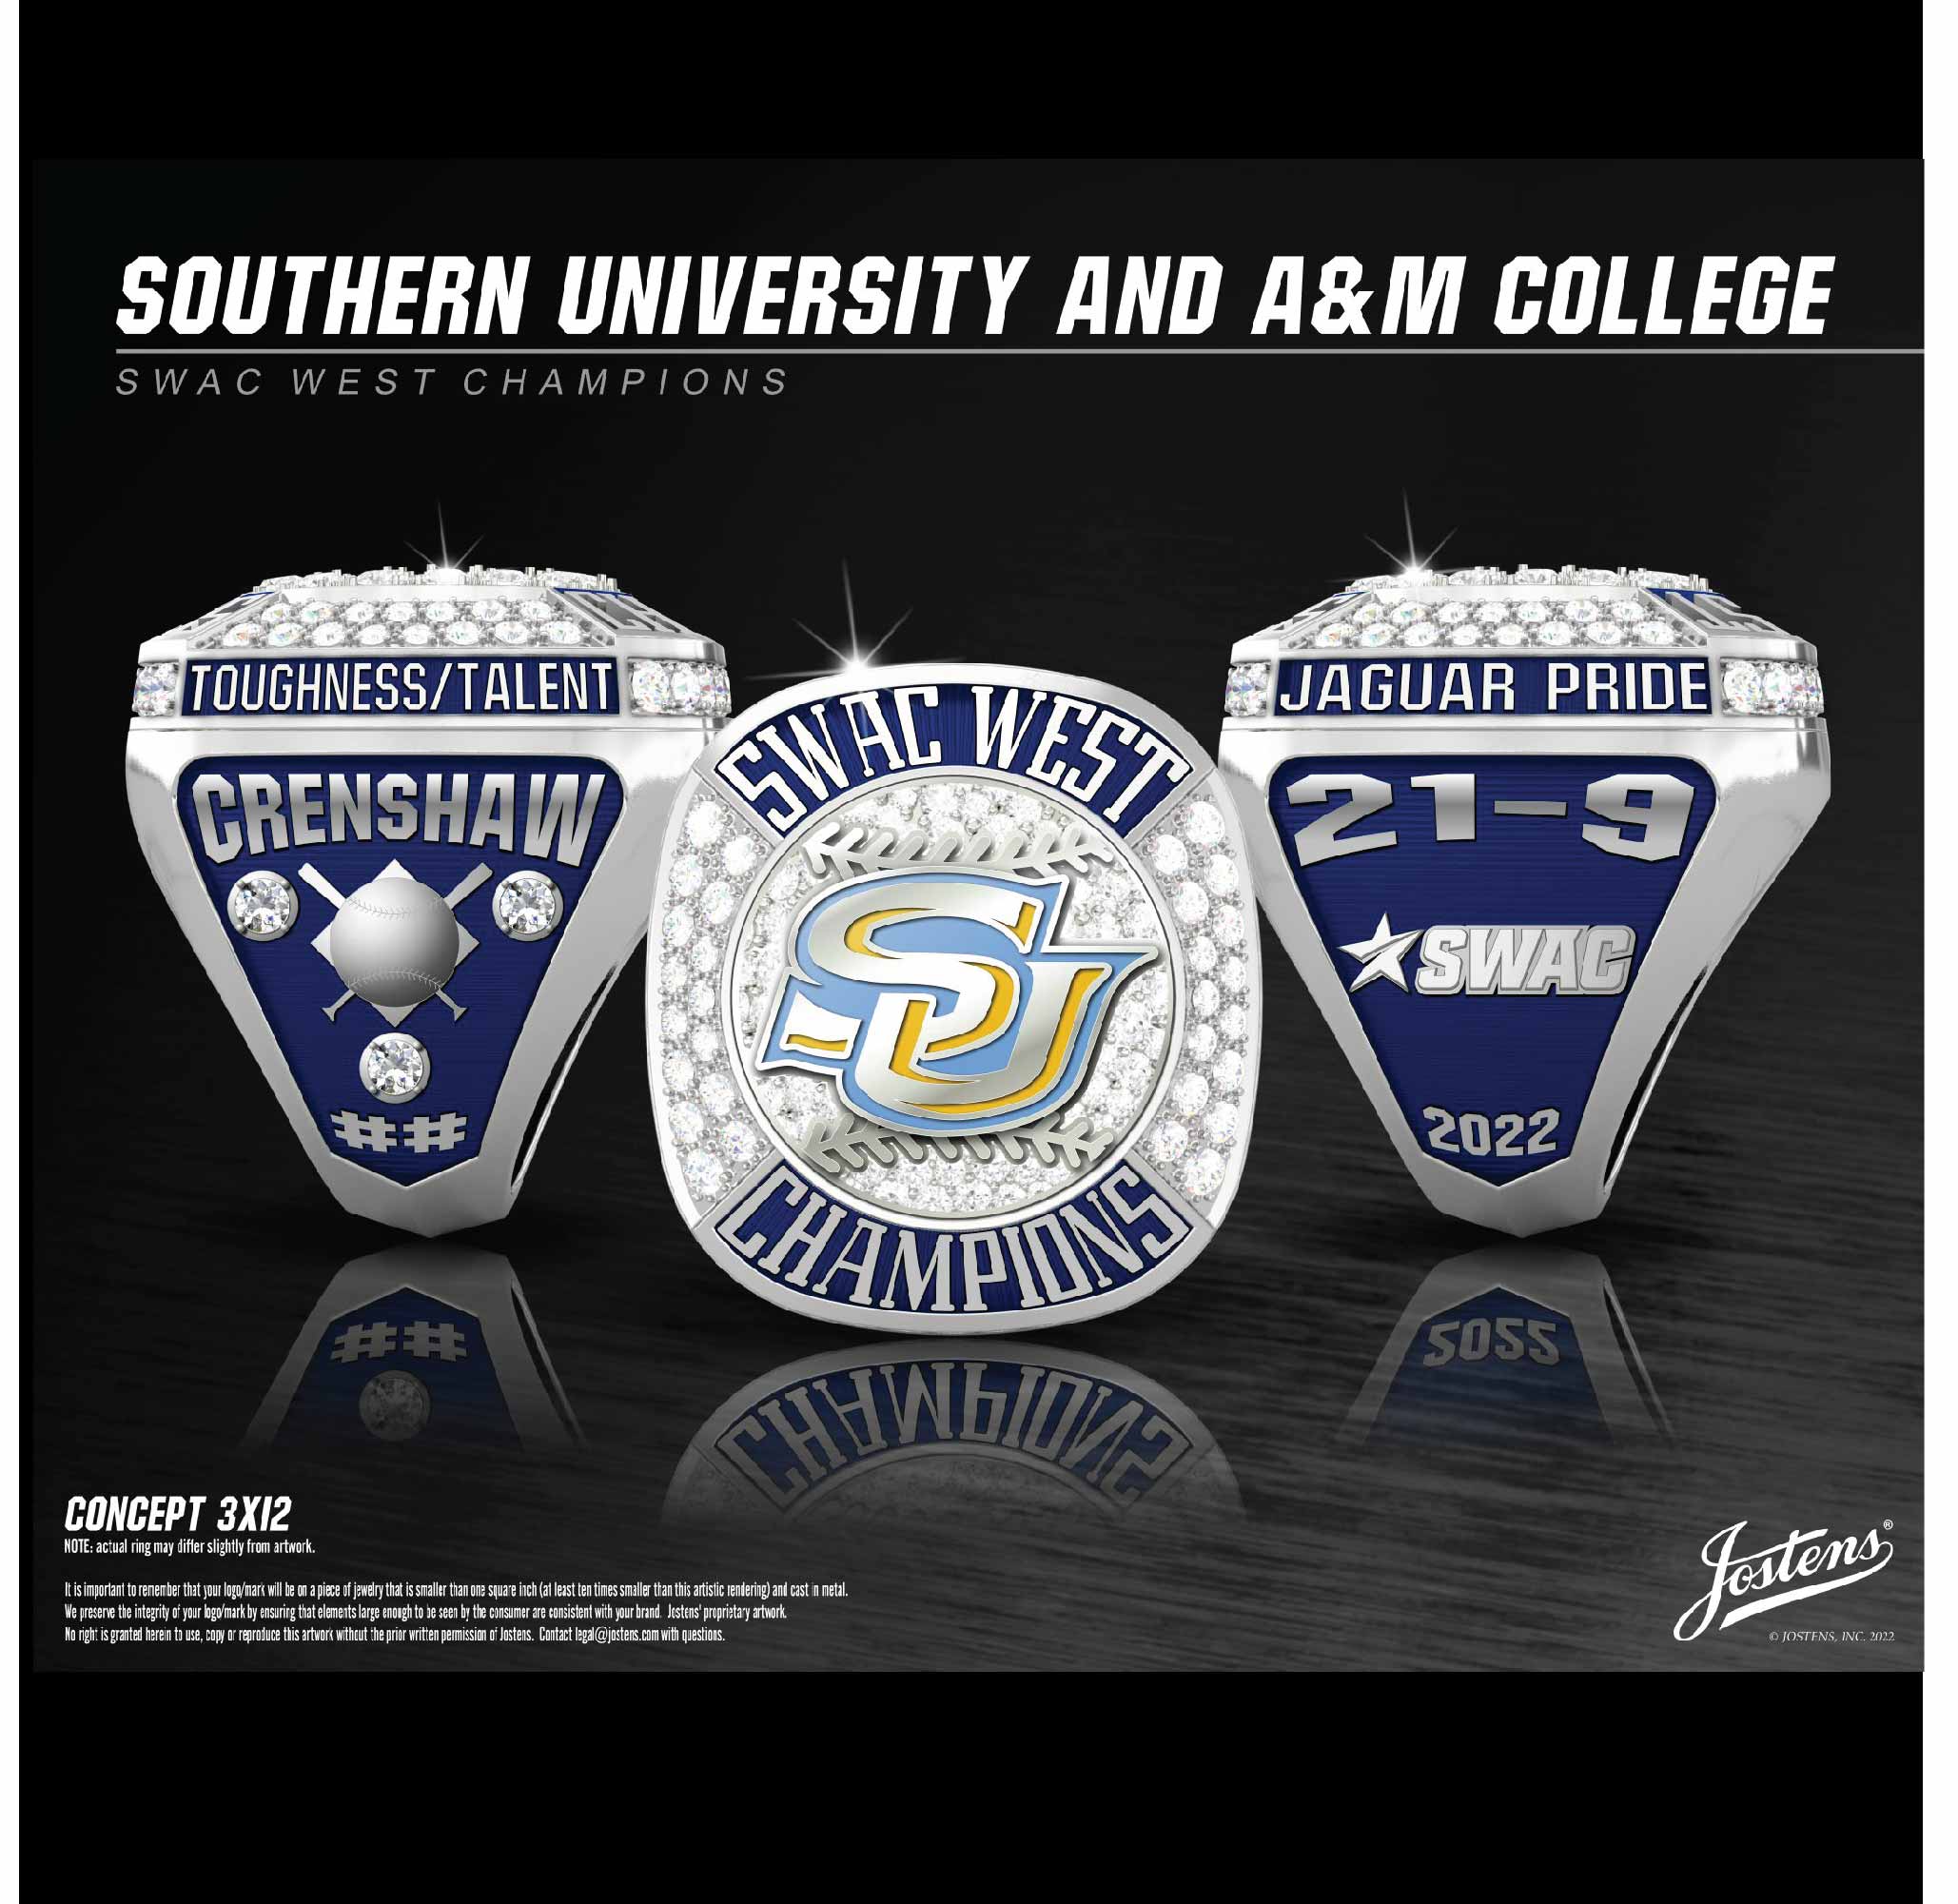 Southern University And A&M College Baseball 2022 SWAC West Championship Ring